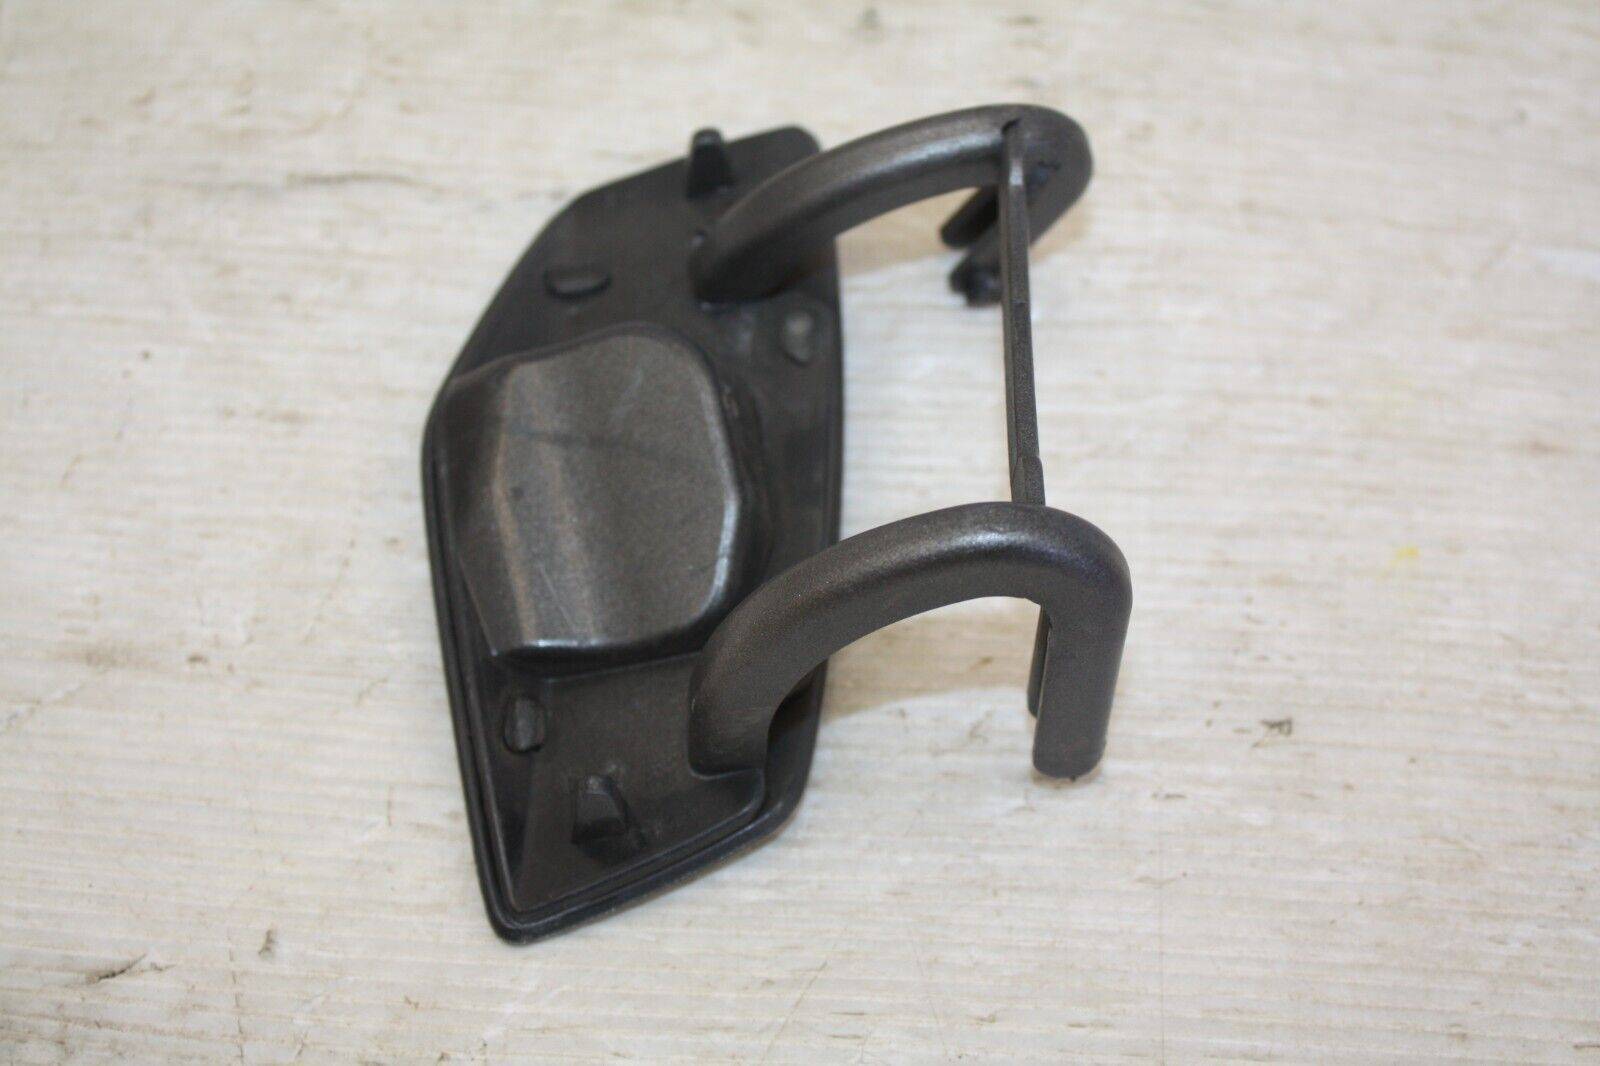 Mercedes-CLA-C117-AMG-Front-Left-Headlight-Washer-Cover-2015-2016-A1178851522-176122600832-5